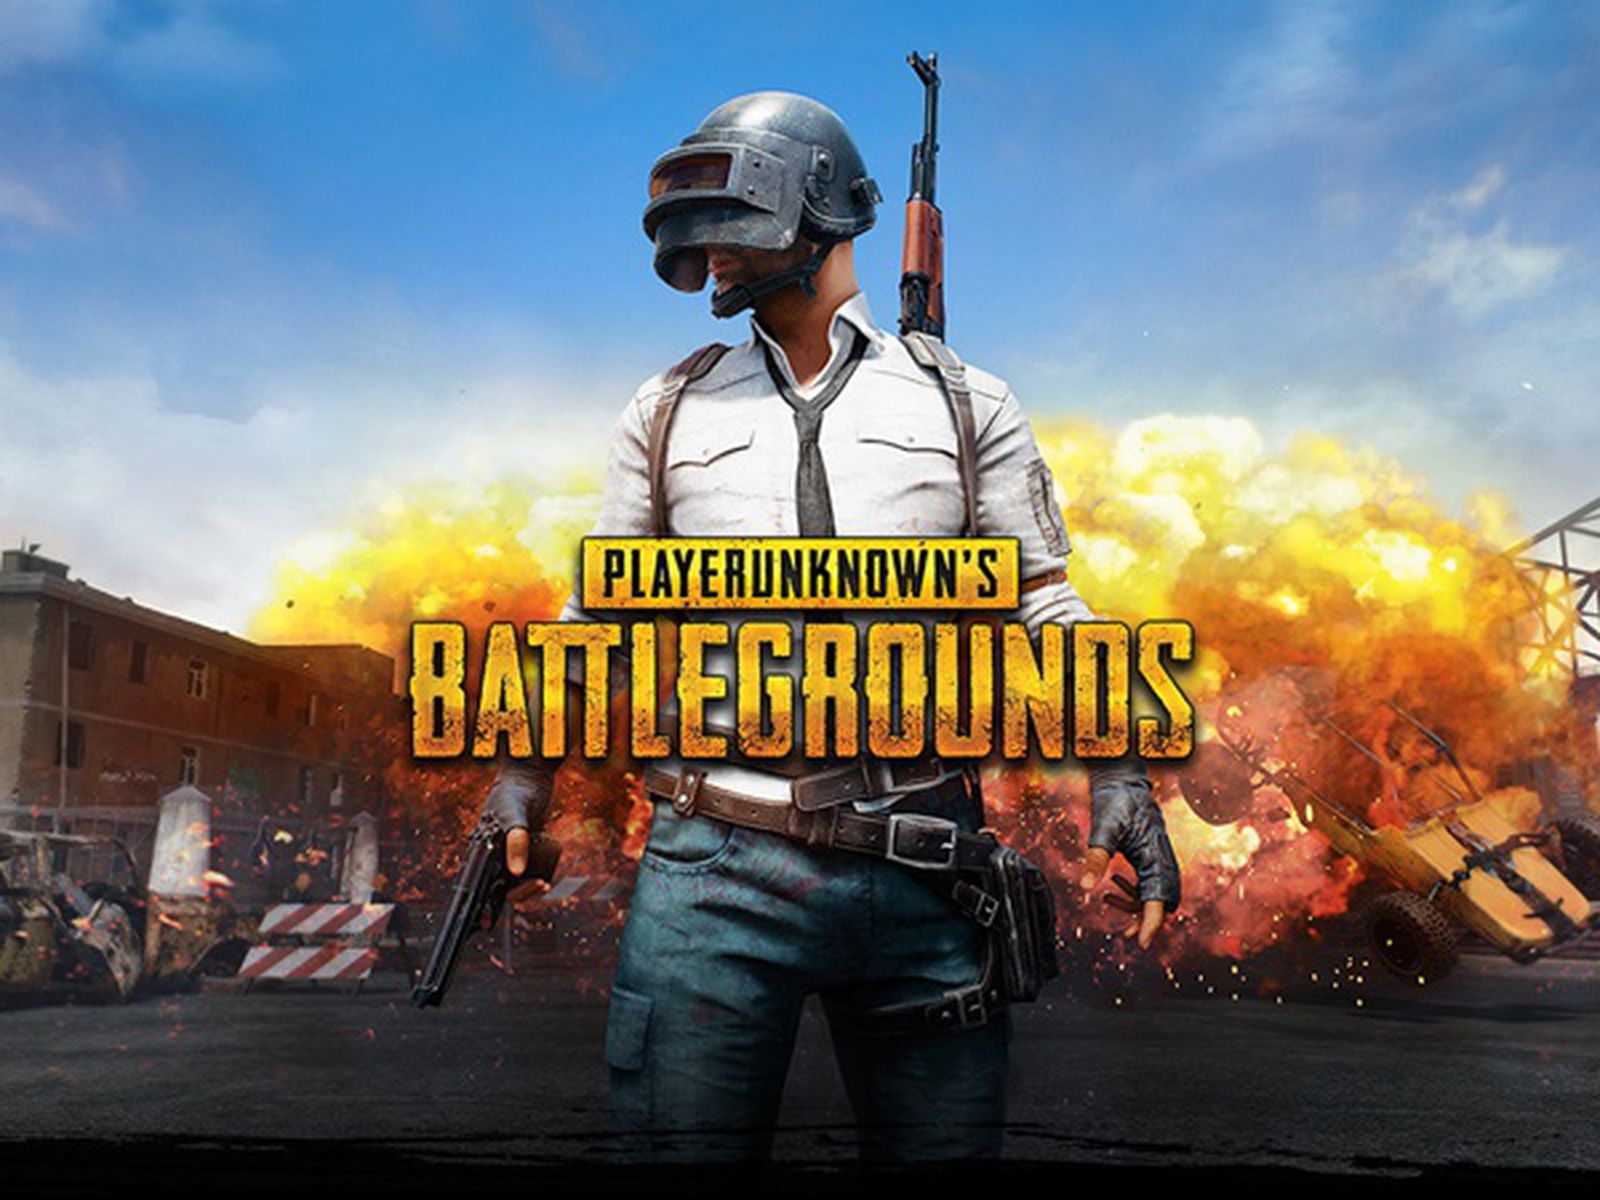 Pubg Maker Sues Apple And Google For Not Removing Clone Apps Macrumors